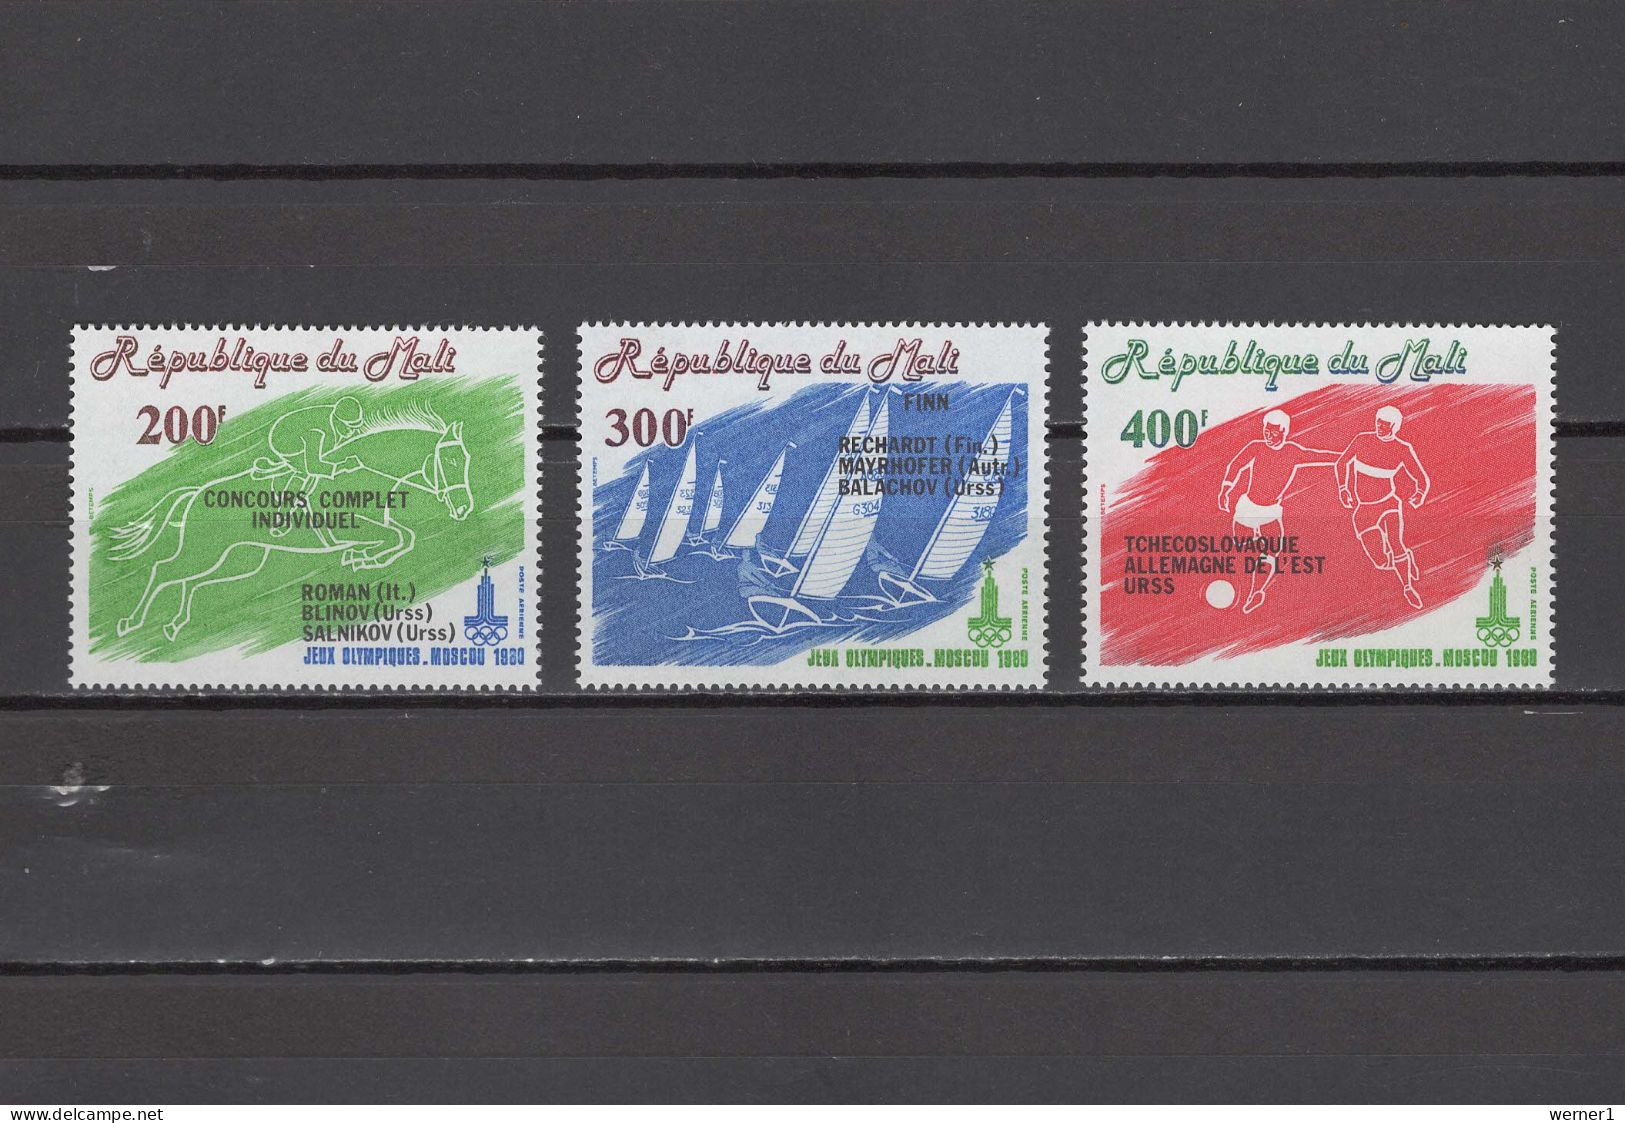 Mali 1980 Olympic Games Moscow, Equestrian, Sailing, Football Soccer Set Of 3 With Winners Overprint MNH - Verano 1980: Moscu